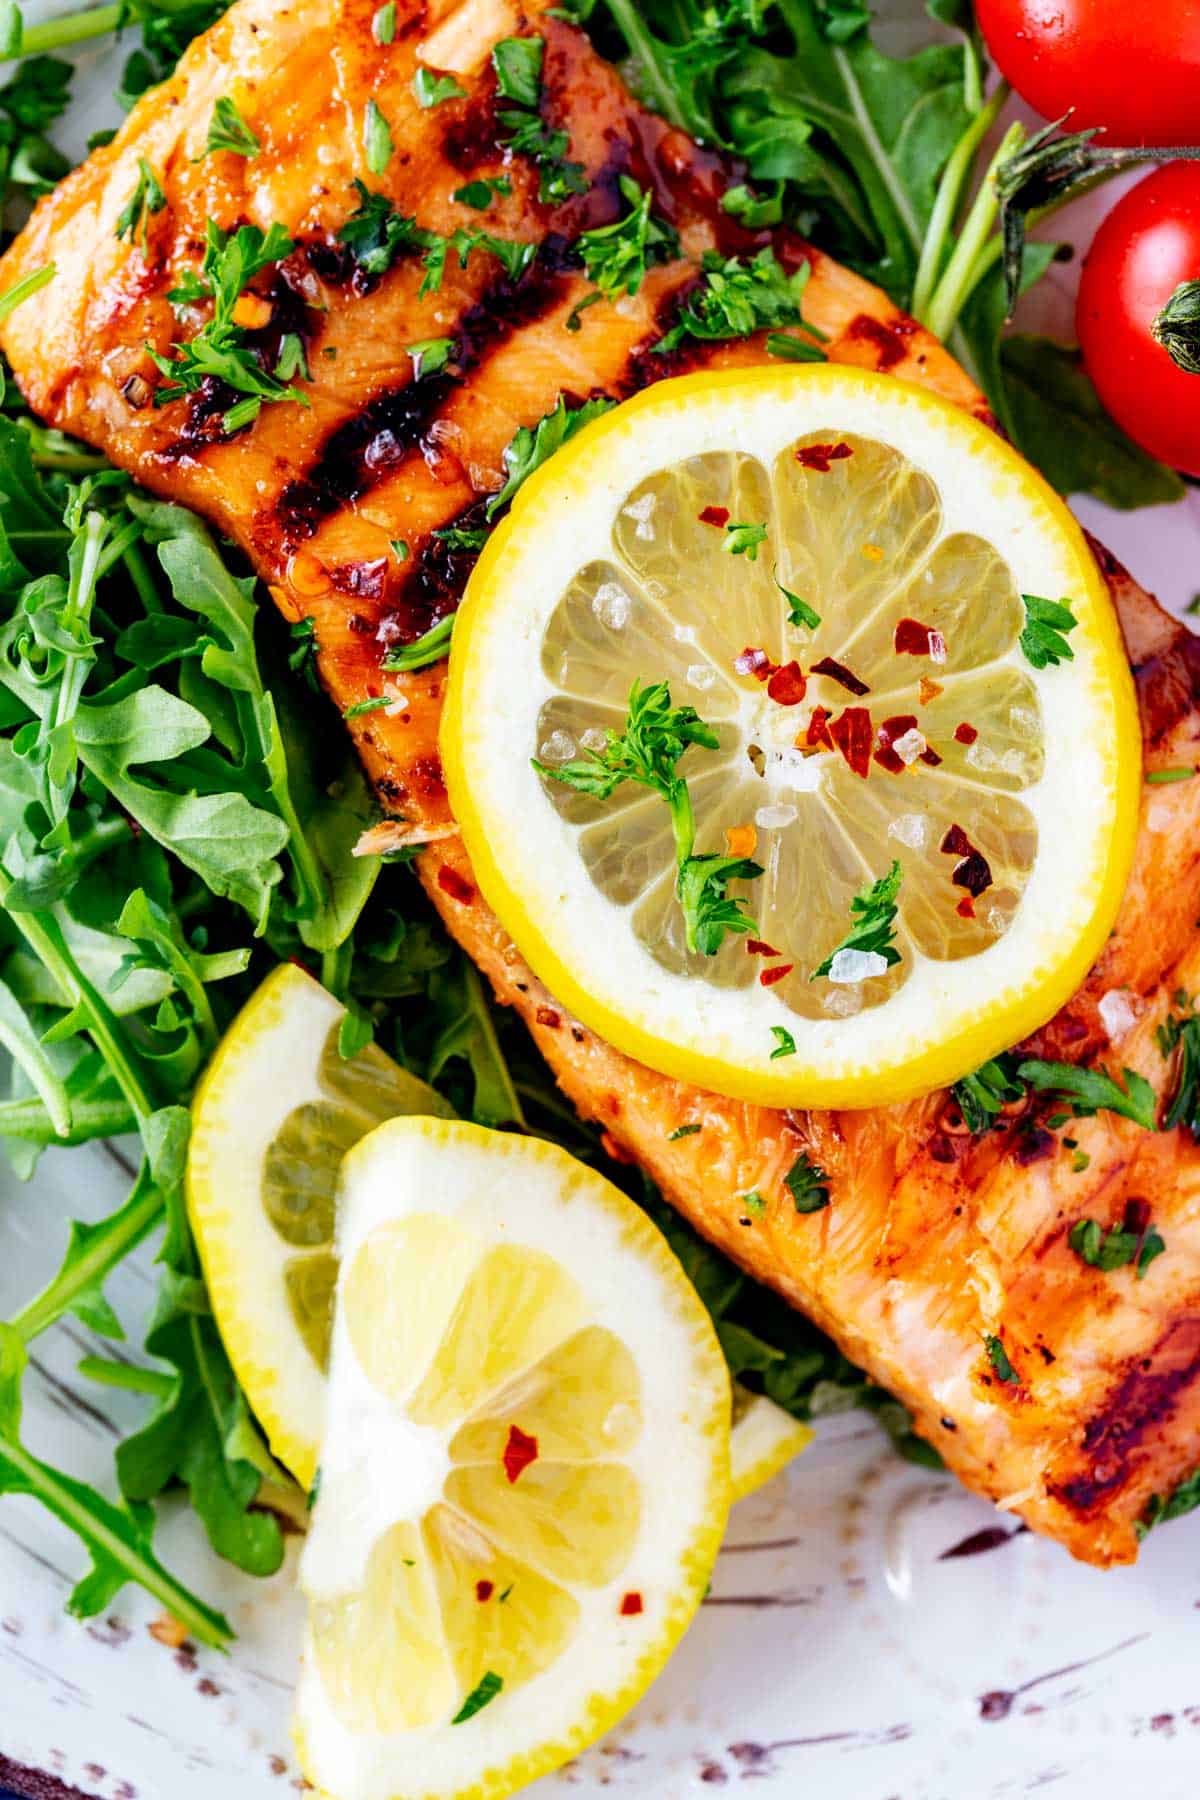 Close up photo of ninja foodi grill salmon garnished with lemon, parsley, and red pepper flakes.